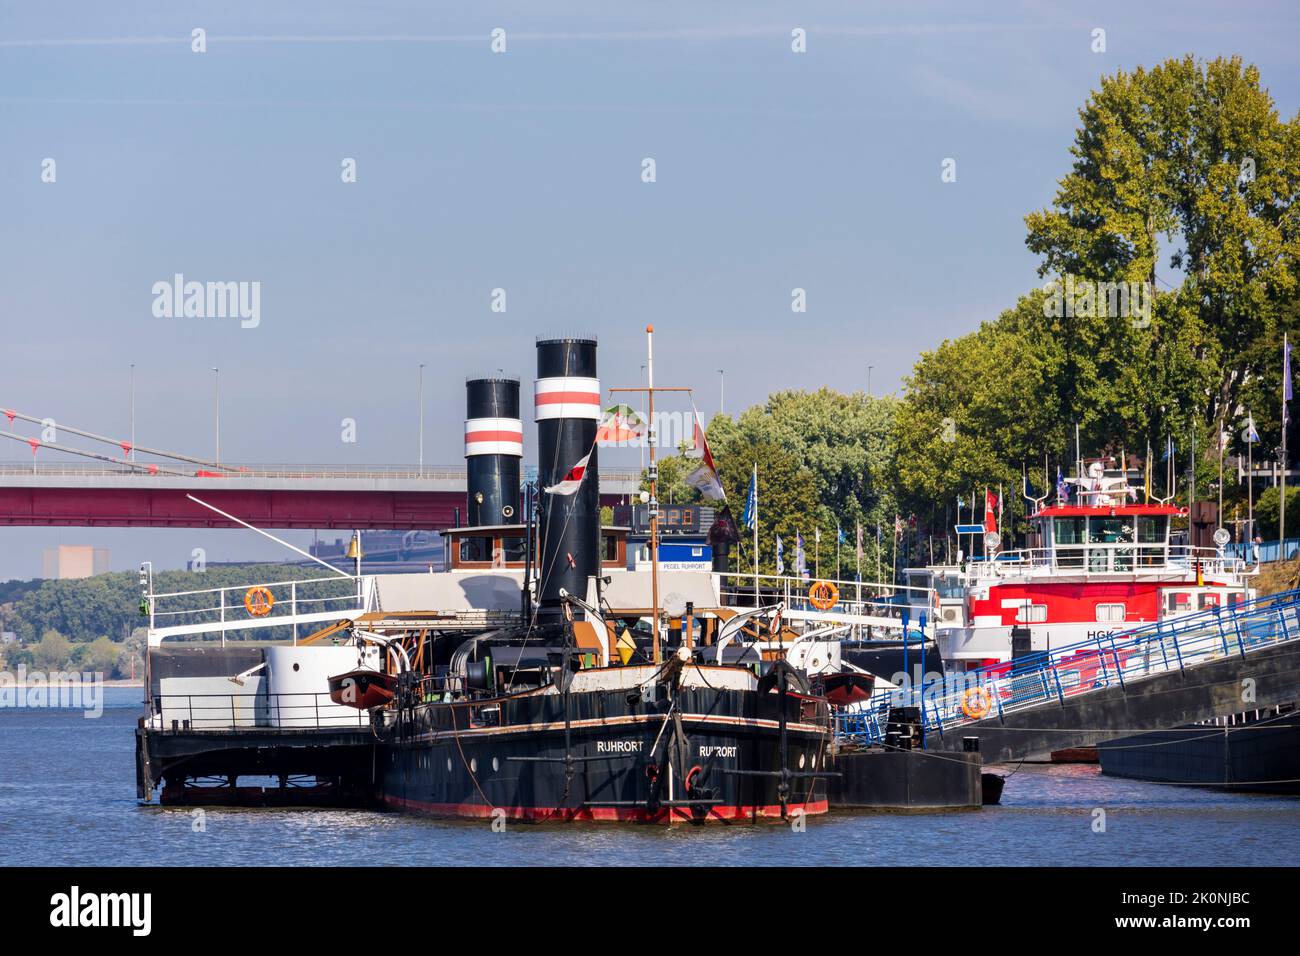 Vinckekanal canal with Oscar Huber museum ship in the harbour of Ruhrort, Duisburg, Ruhr Area, North Rhine-Westphalia, Germany, Europe Stock Photo